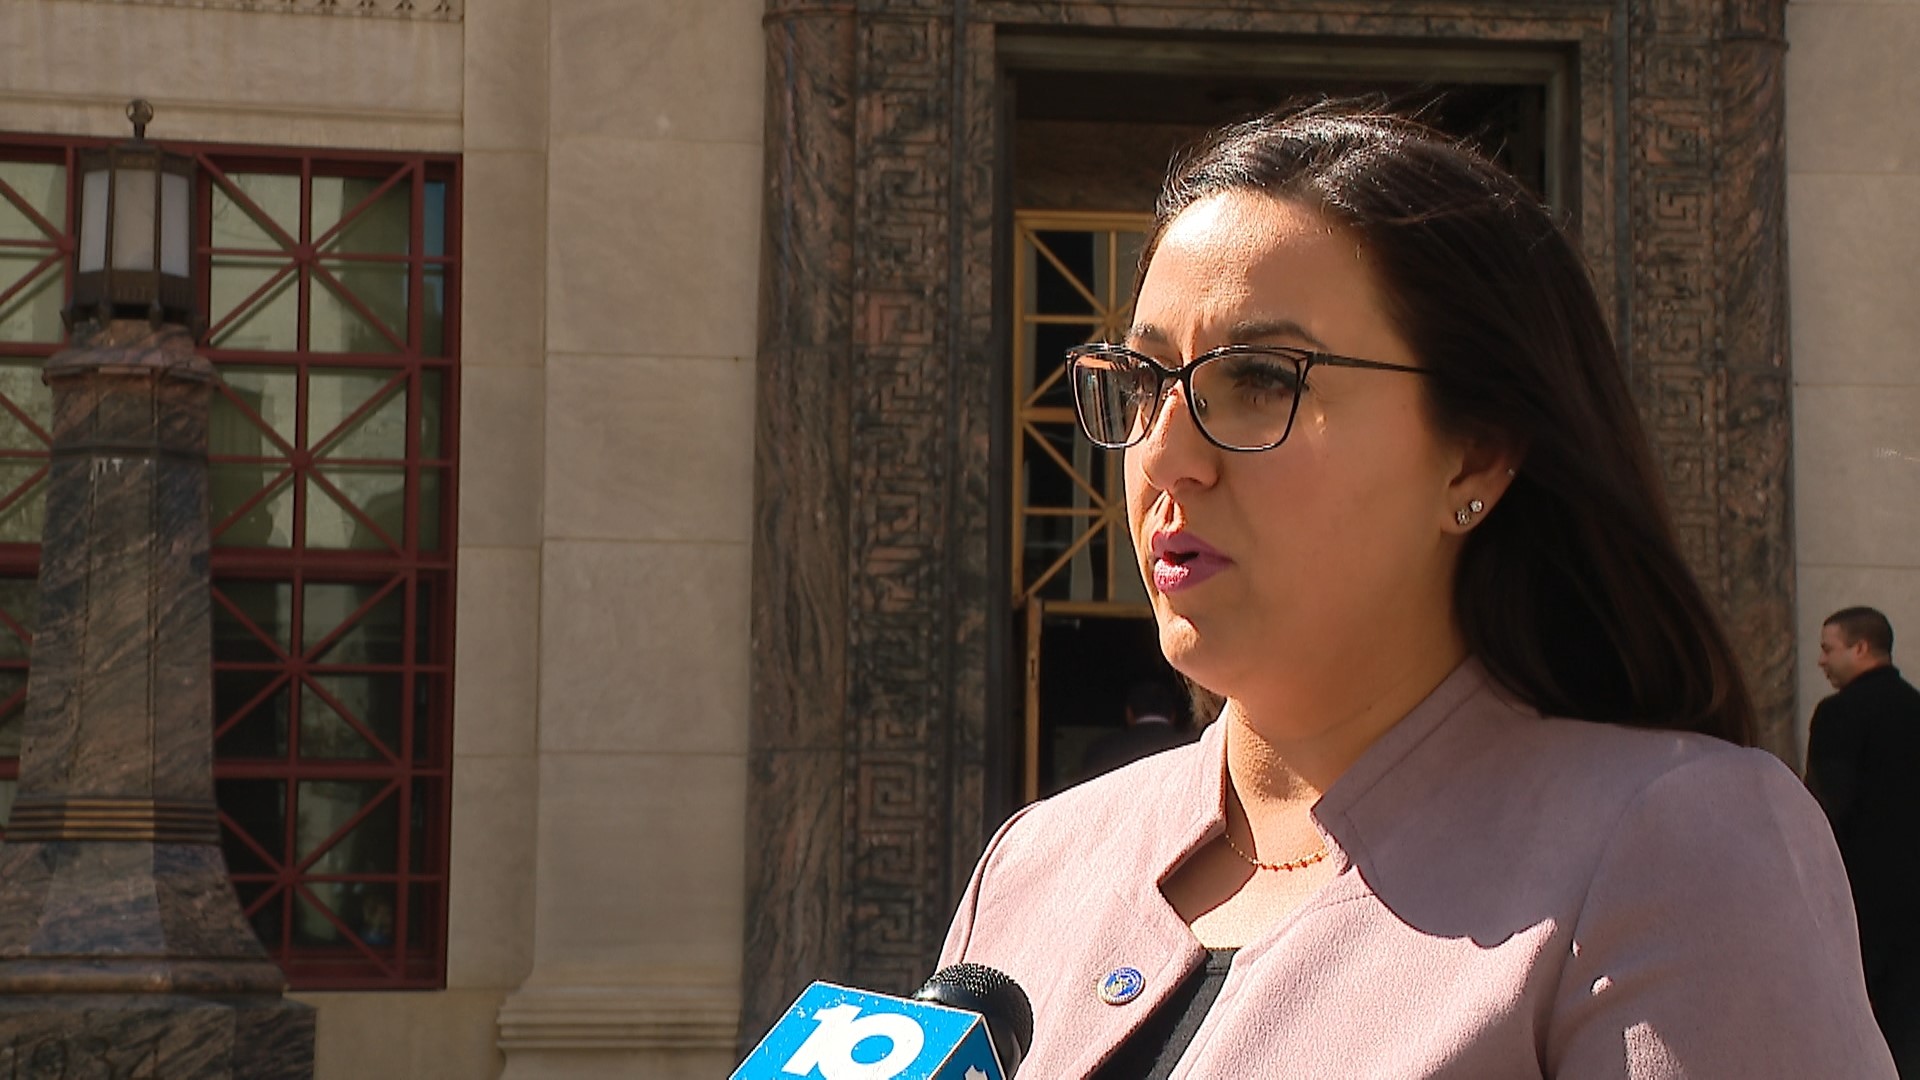 Columbus Mayor Andrew Ginther announced on Monday he has appointed Rena Shak to lead the newly created Office of Violence Prevention.